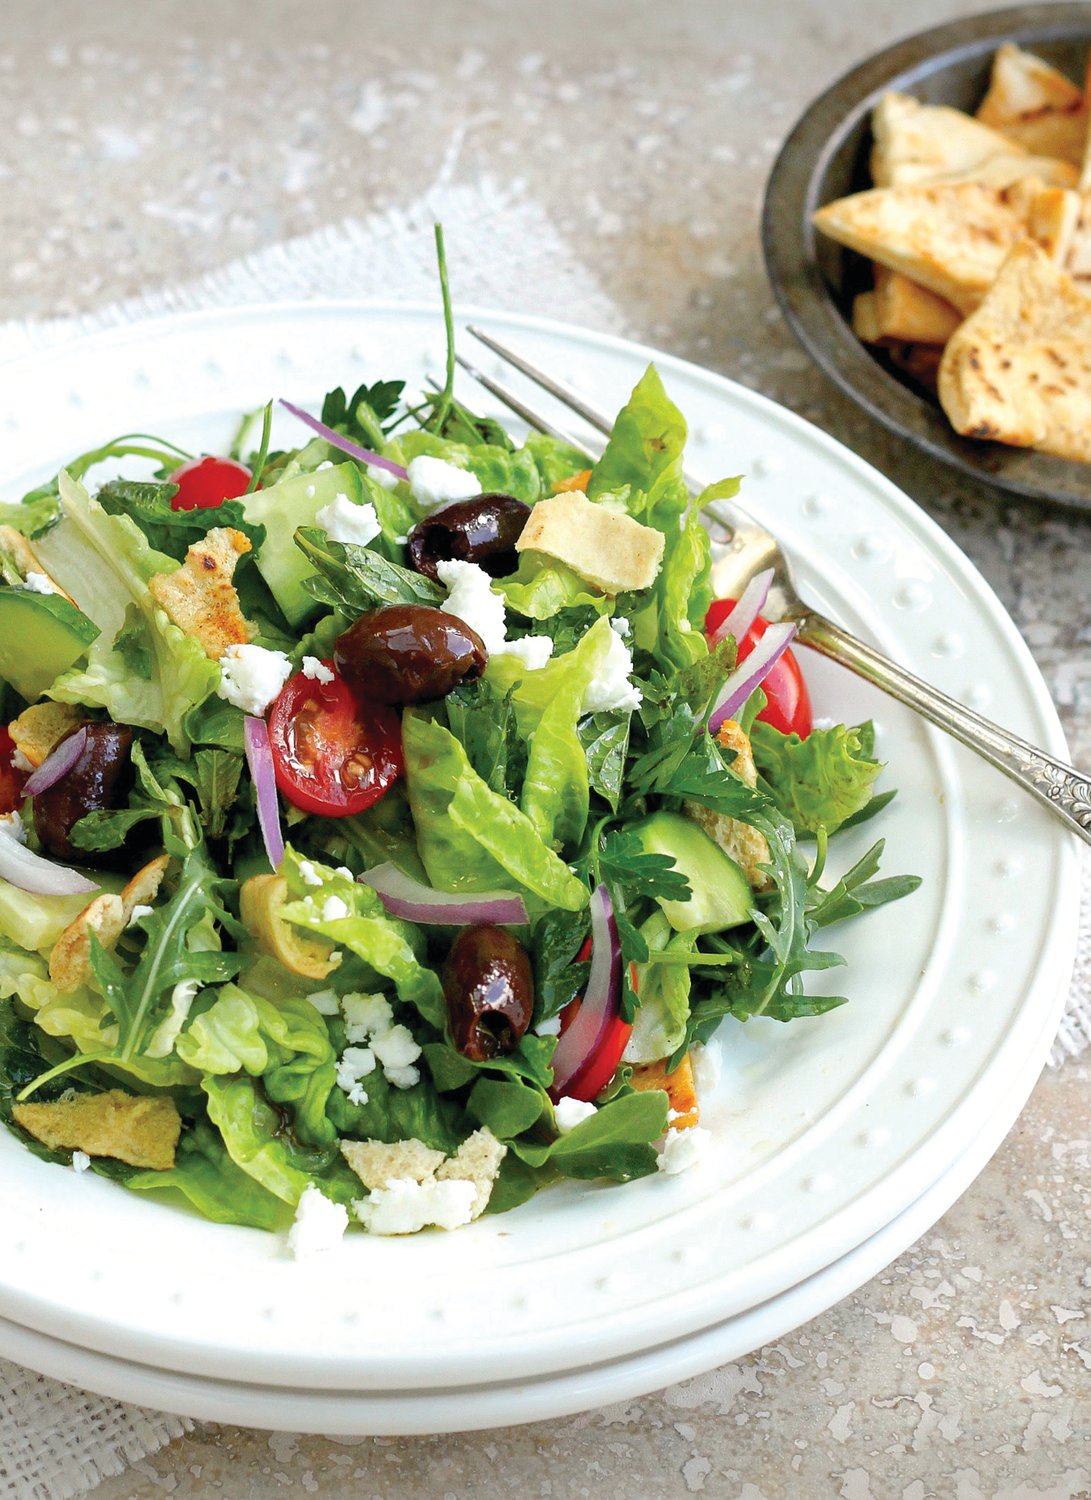 Fattoush is a garden salad and a bread salad at once, brimming with fresh greens and garden vegetables, studded with feta cheese and olives, and tumbled with shards of crispy pita bread.